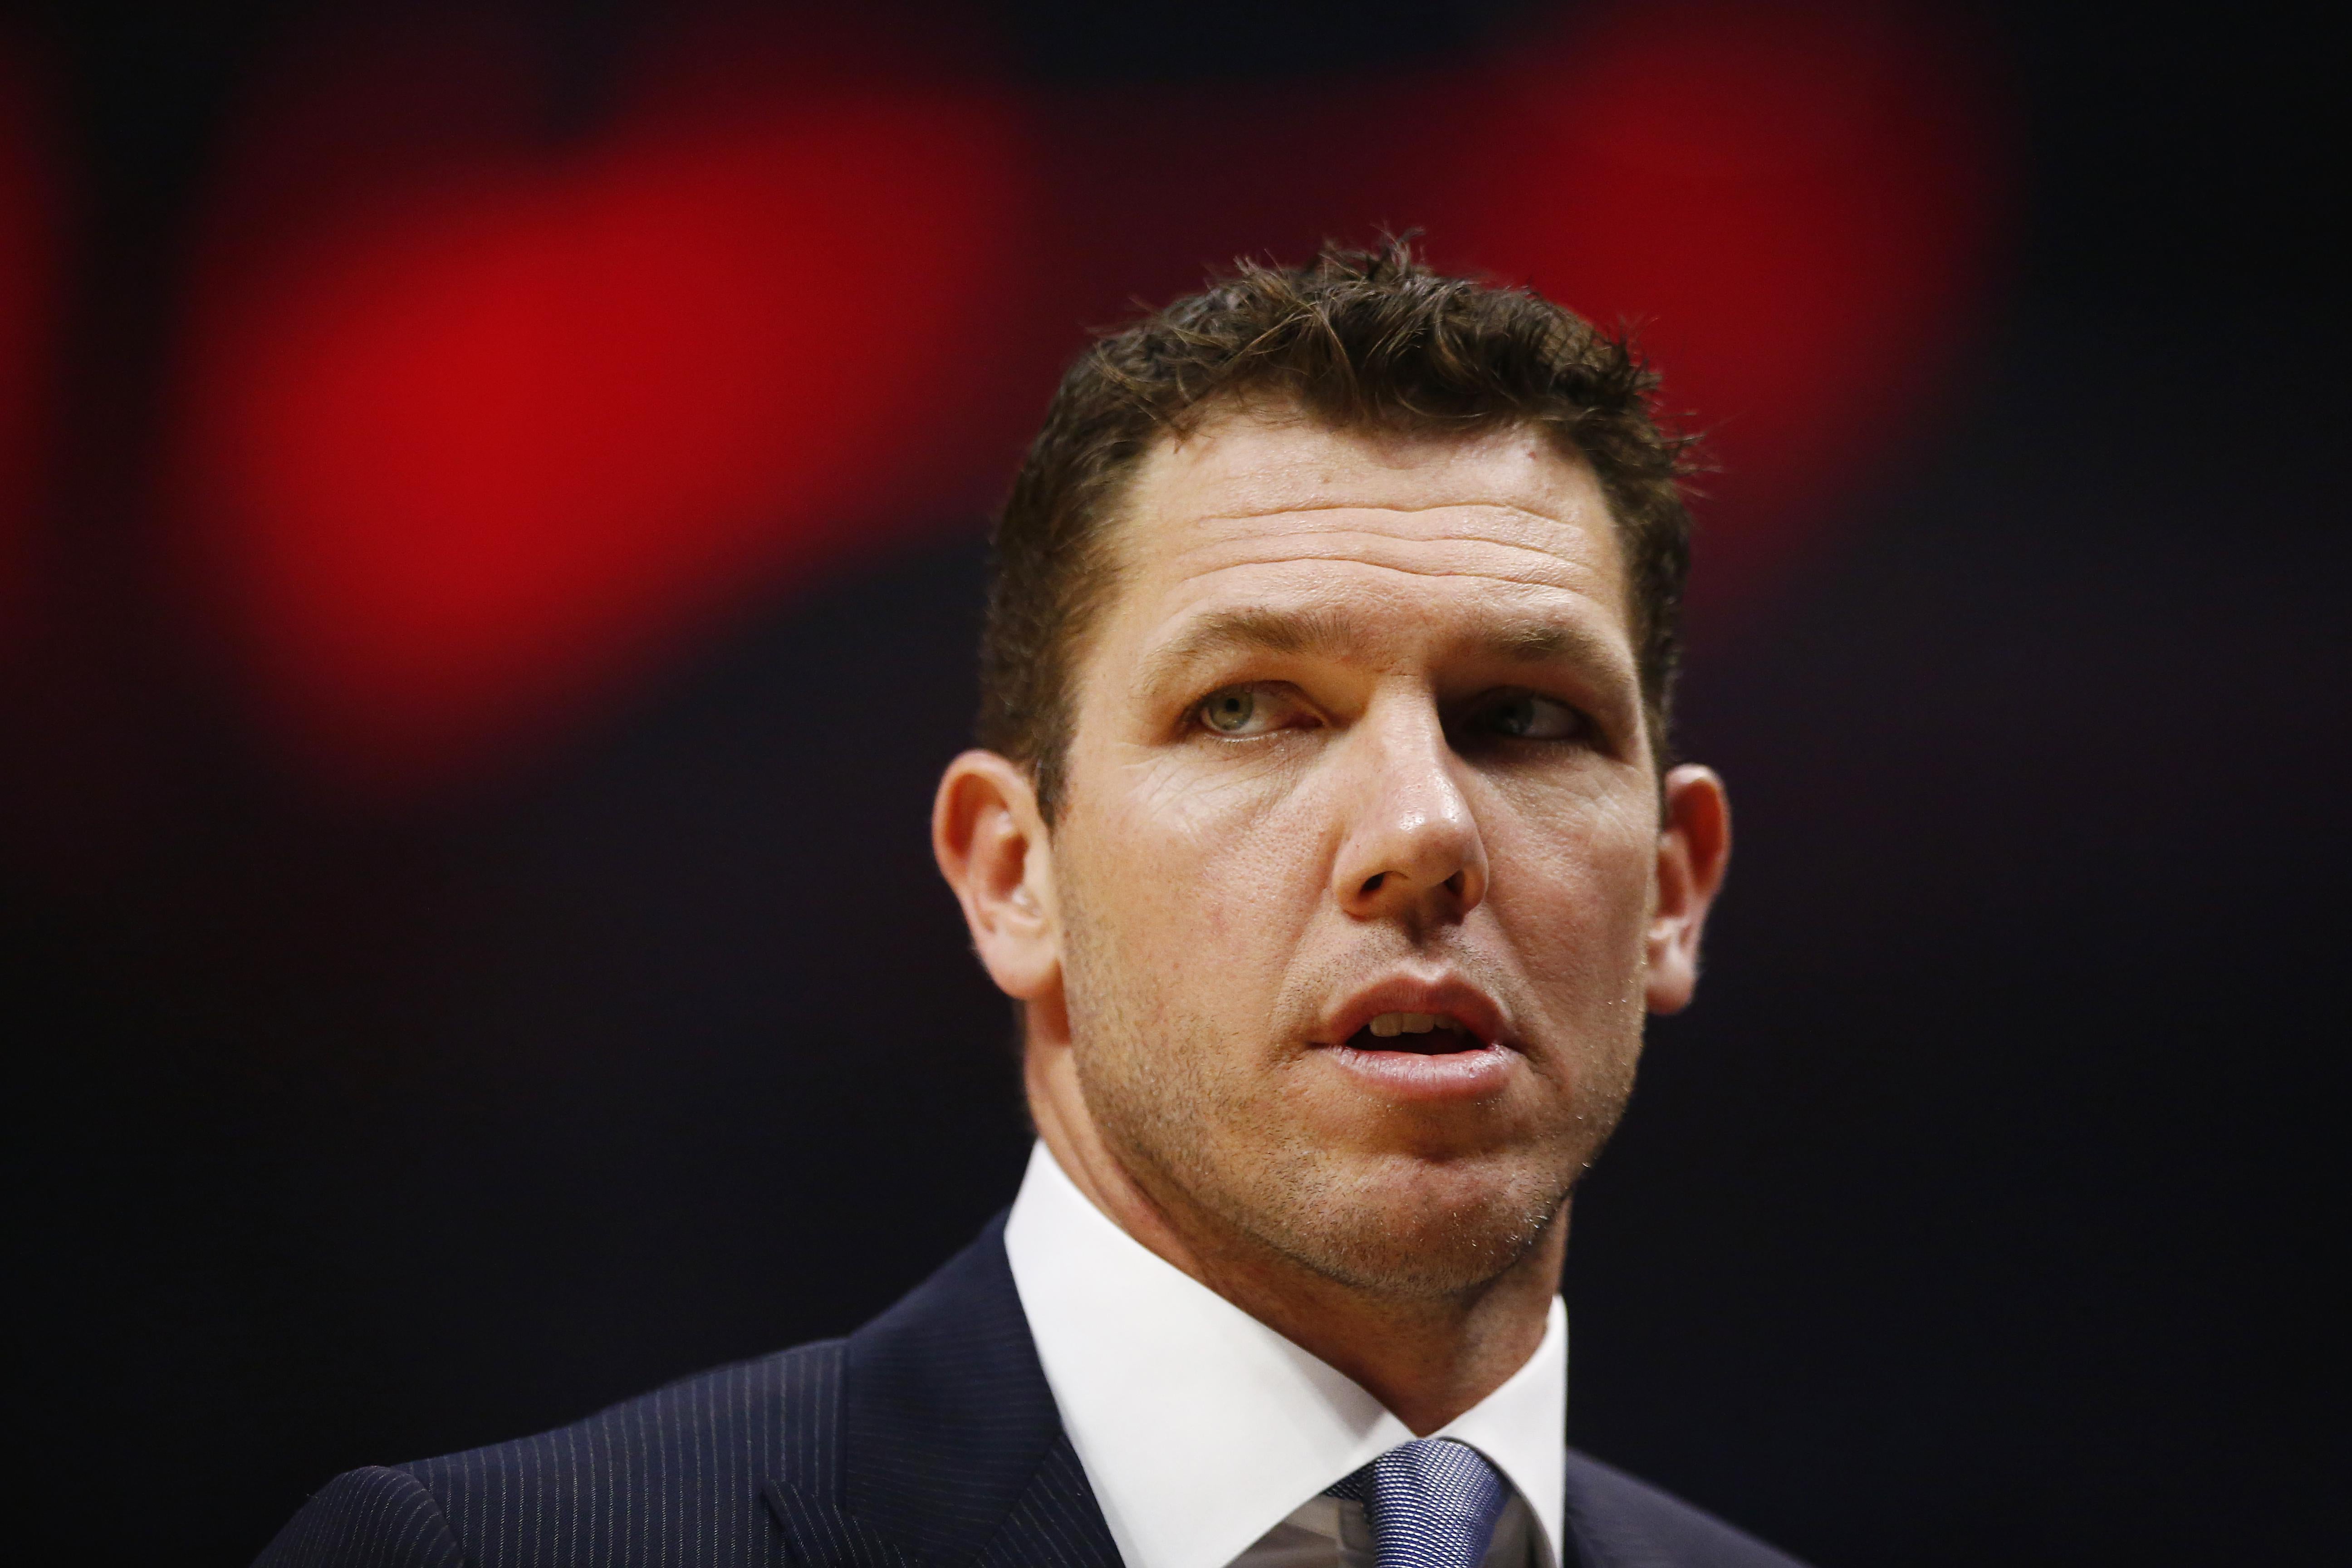 Luke Walton during a Los Angeles Lakers game at Staples Center on April 5, 2019 in Los Angeles, California.